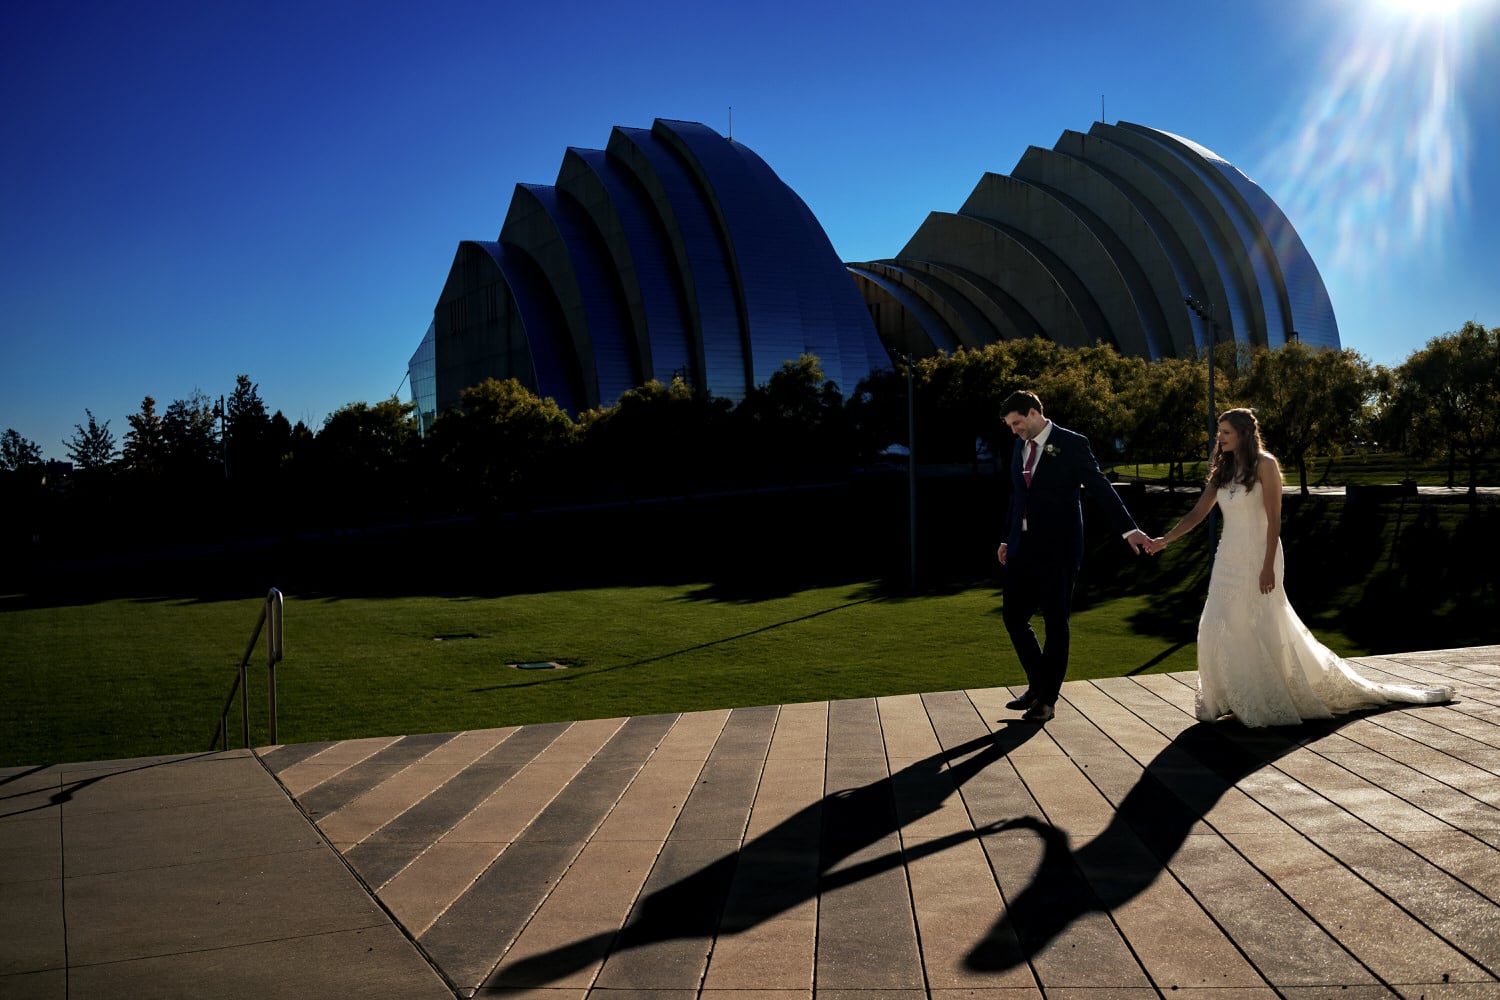 A colorful, candid picture of a bride and groom holding hands and walking across a black and white striped pavement, the Kauffman Center for the Performing Arts visible in the background on a fall wedding day in Kansas City. 